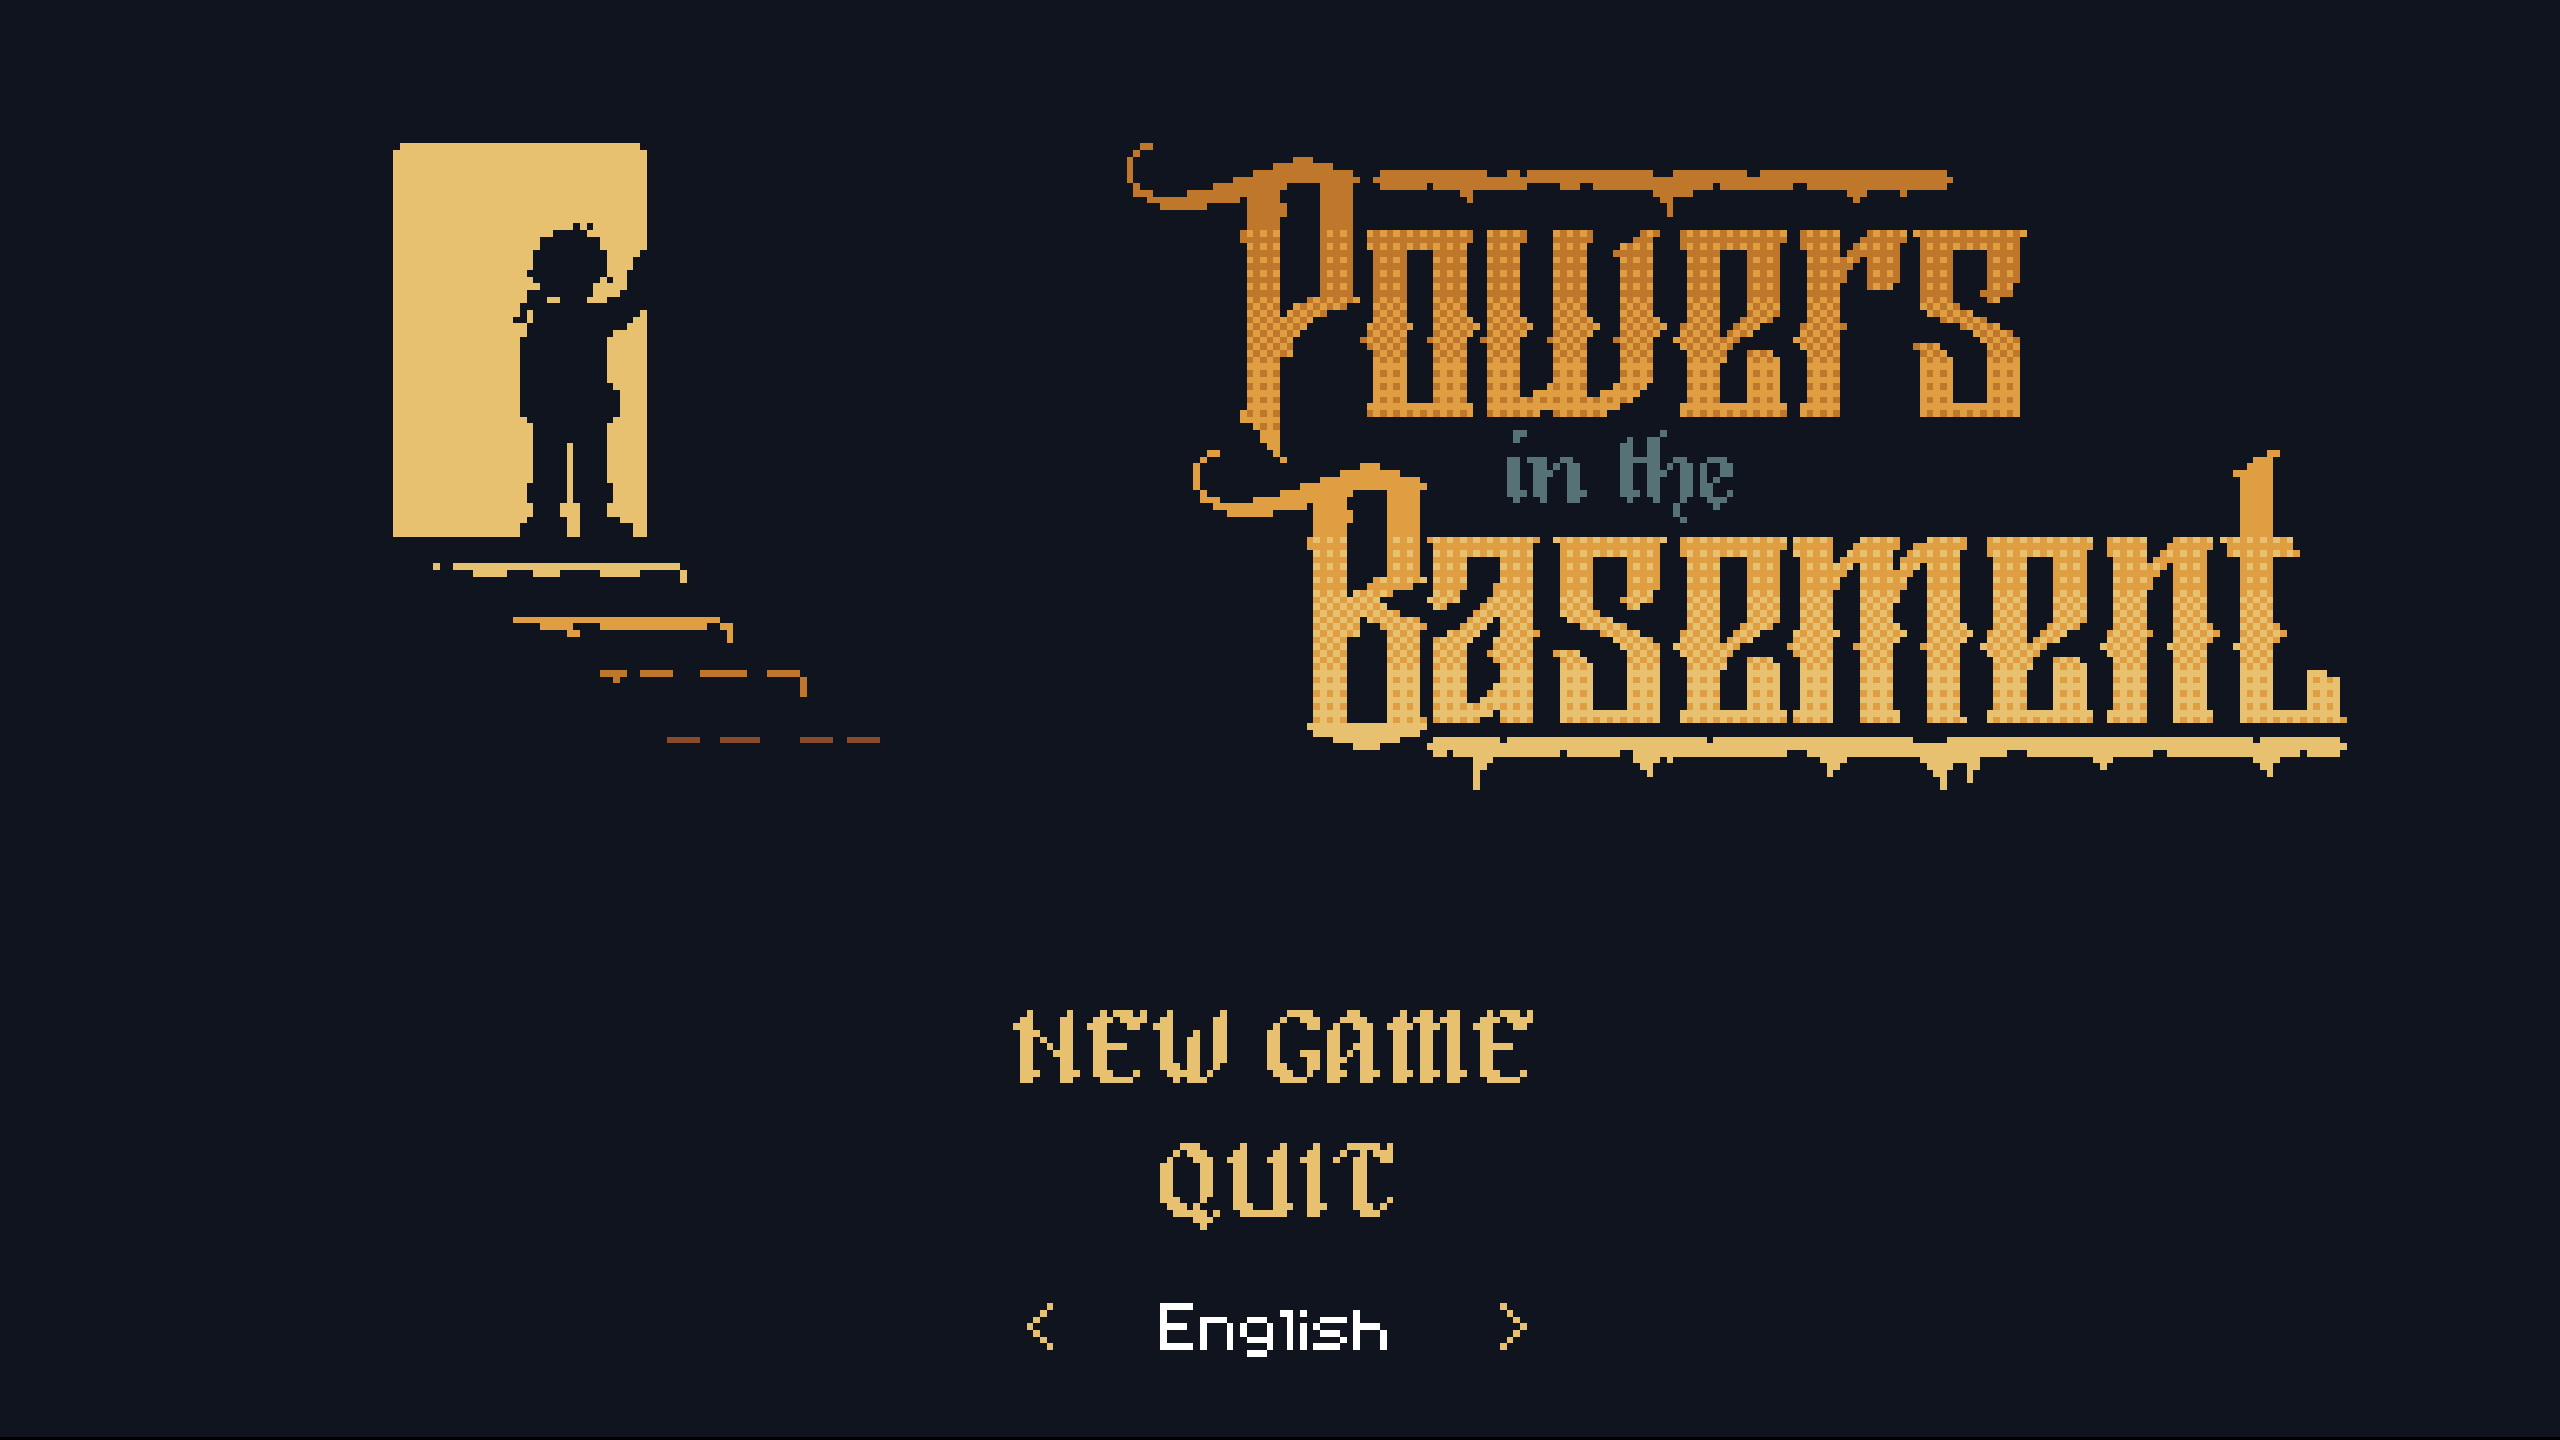 Powers in the basement - Intro screen, with a scared Will ready to face his fears.